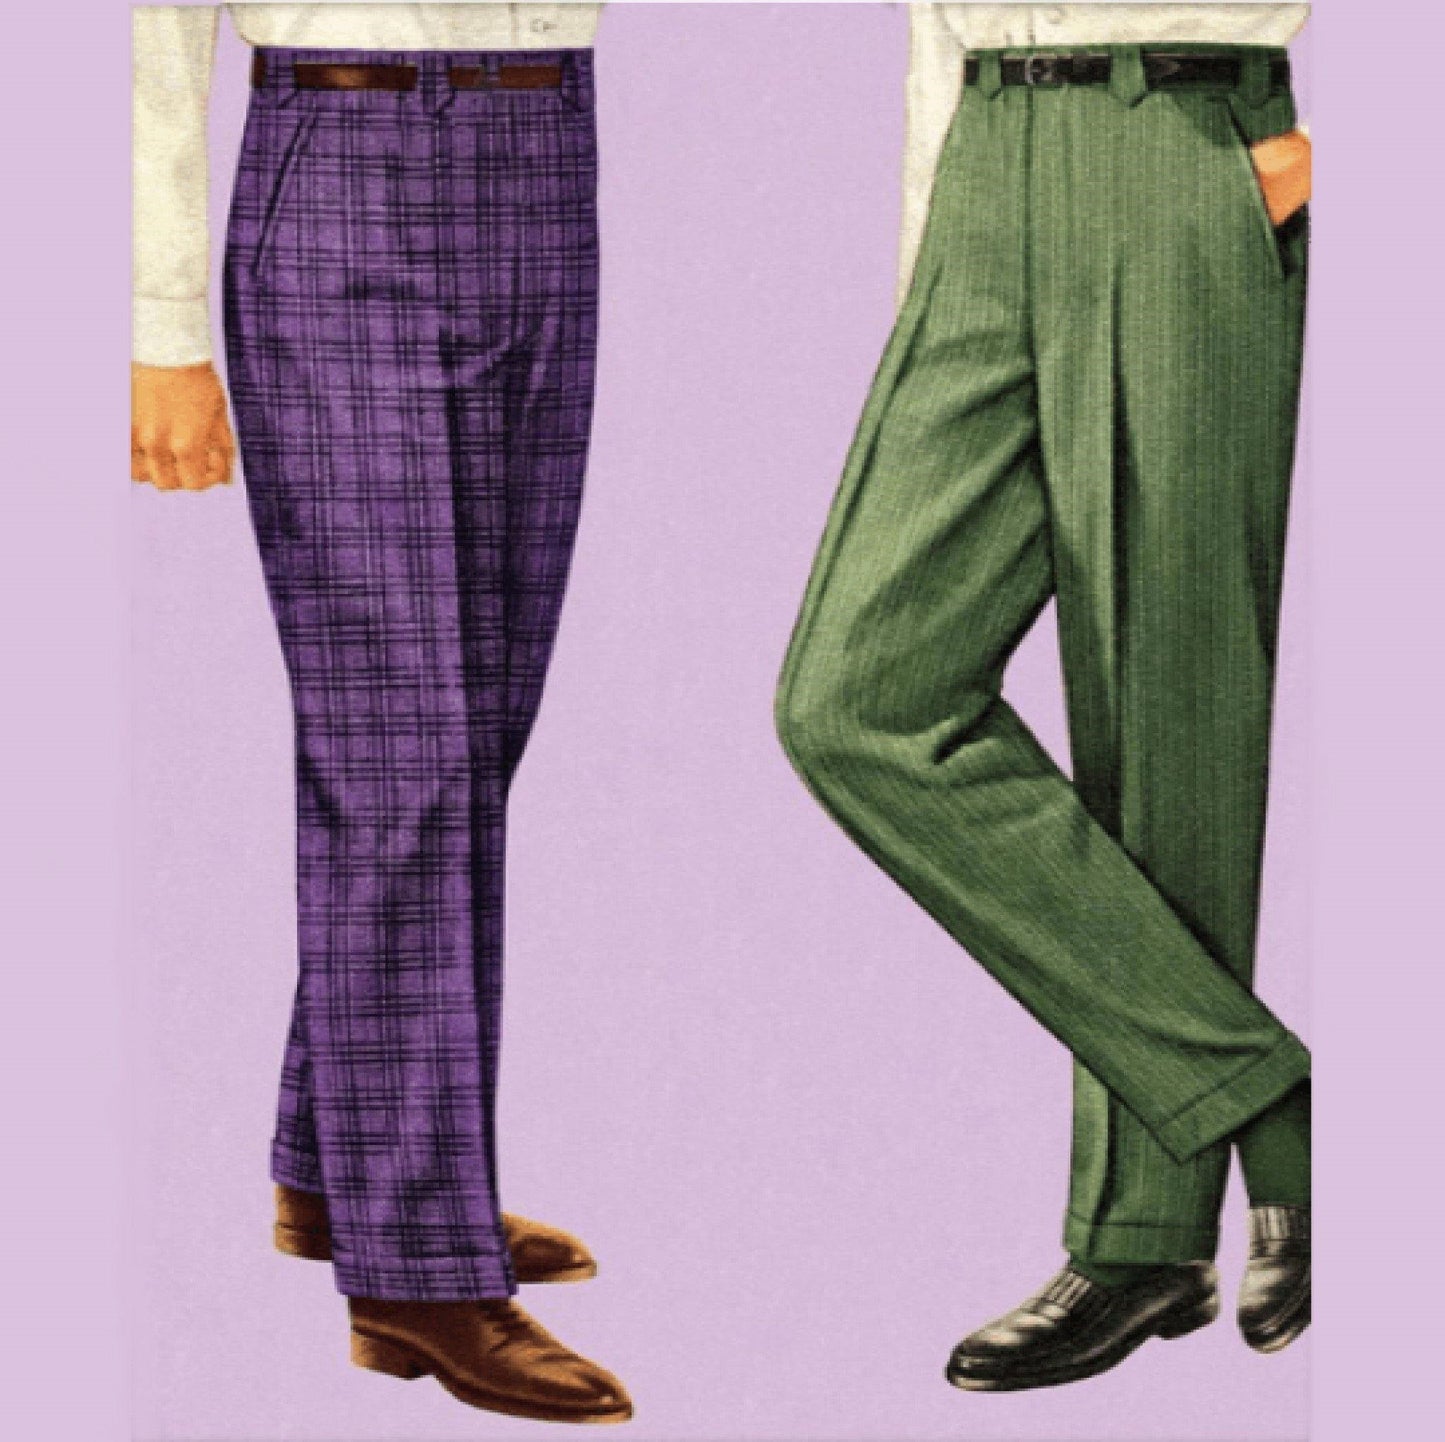 1950s Pattern, Men's Trousers and Bermuda Shorts - Multi sizes - Instantly Print at Home - Vintage Sewing Pattern Company